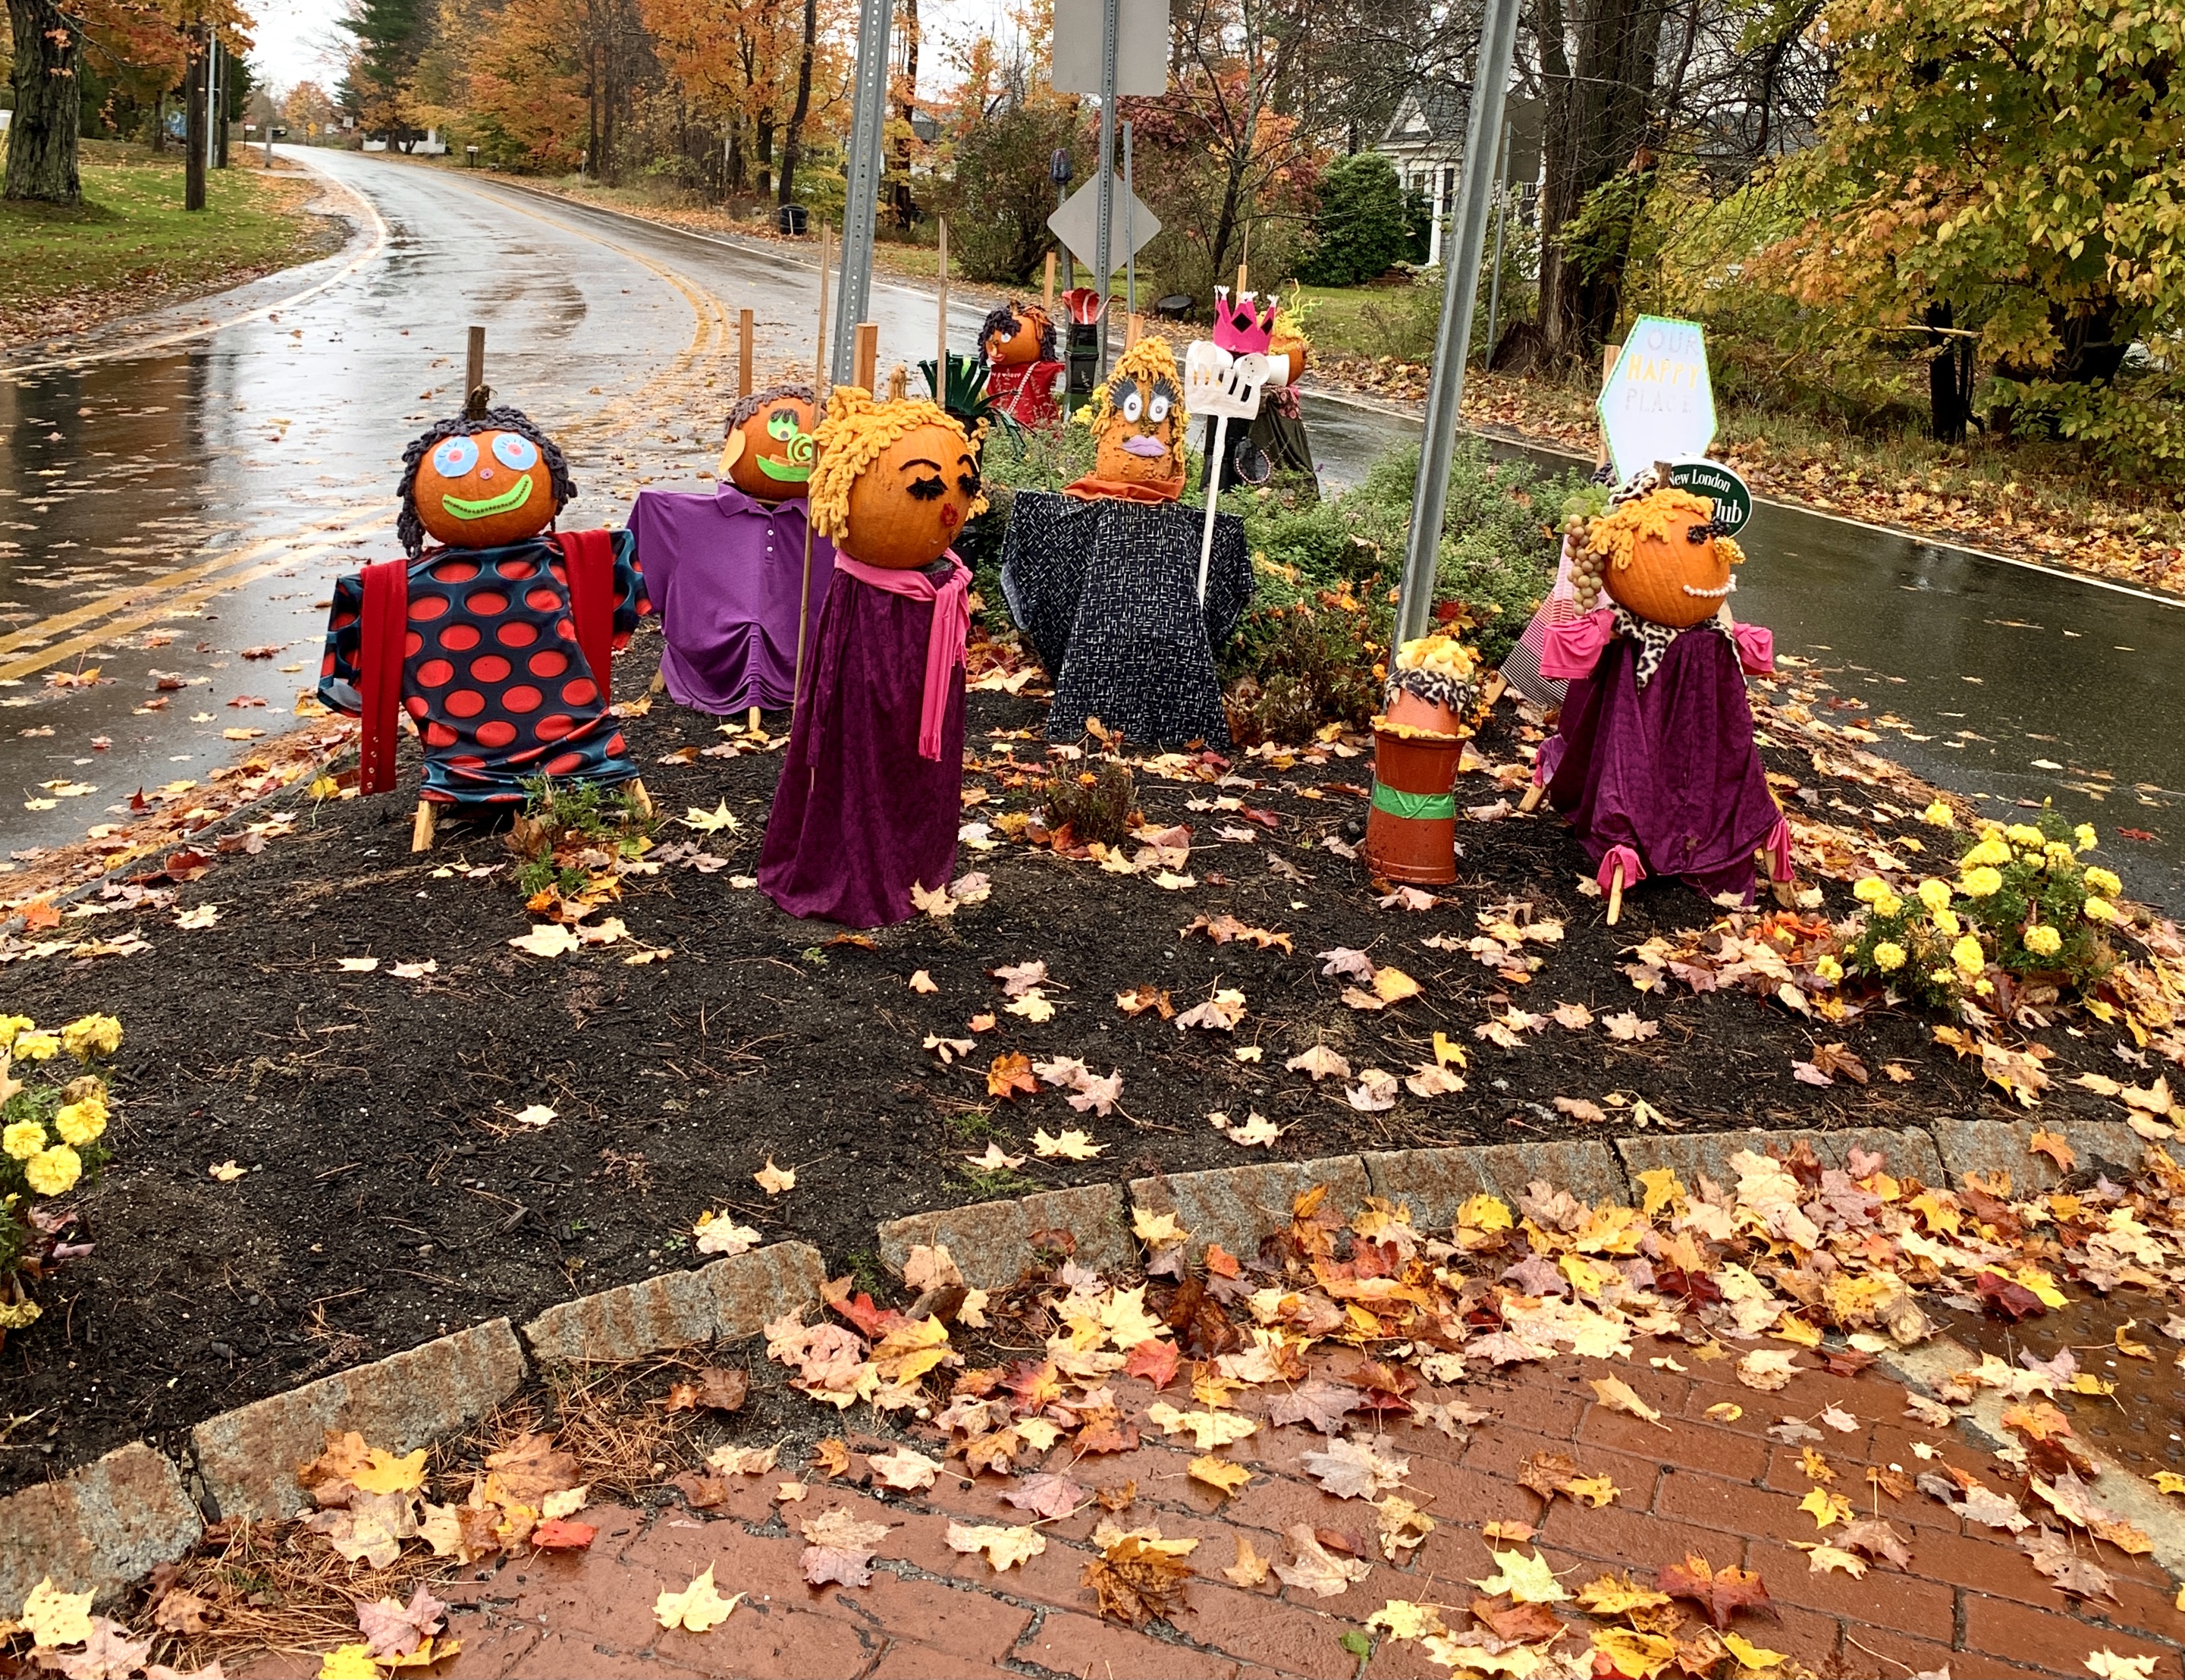 Garden club contribution to Halloween characters in New London